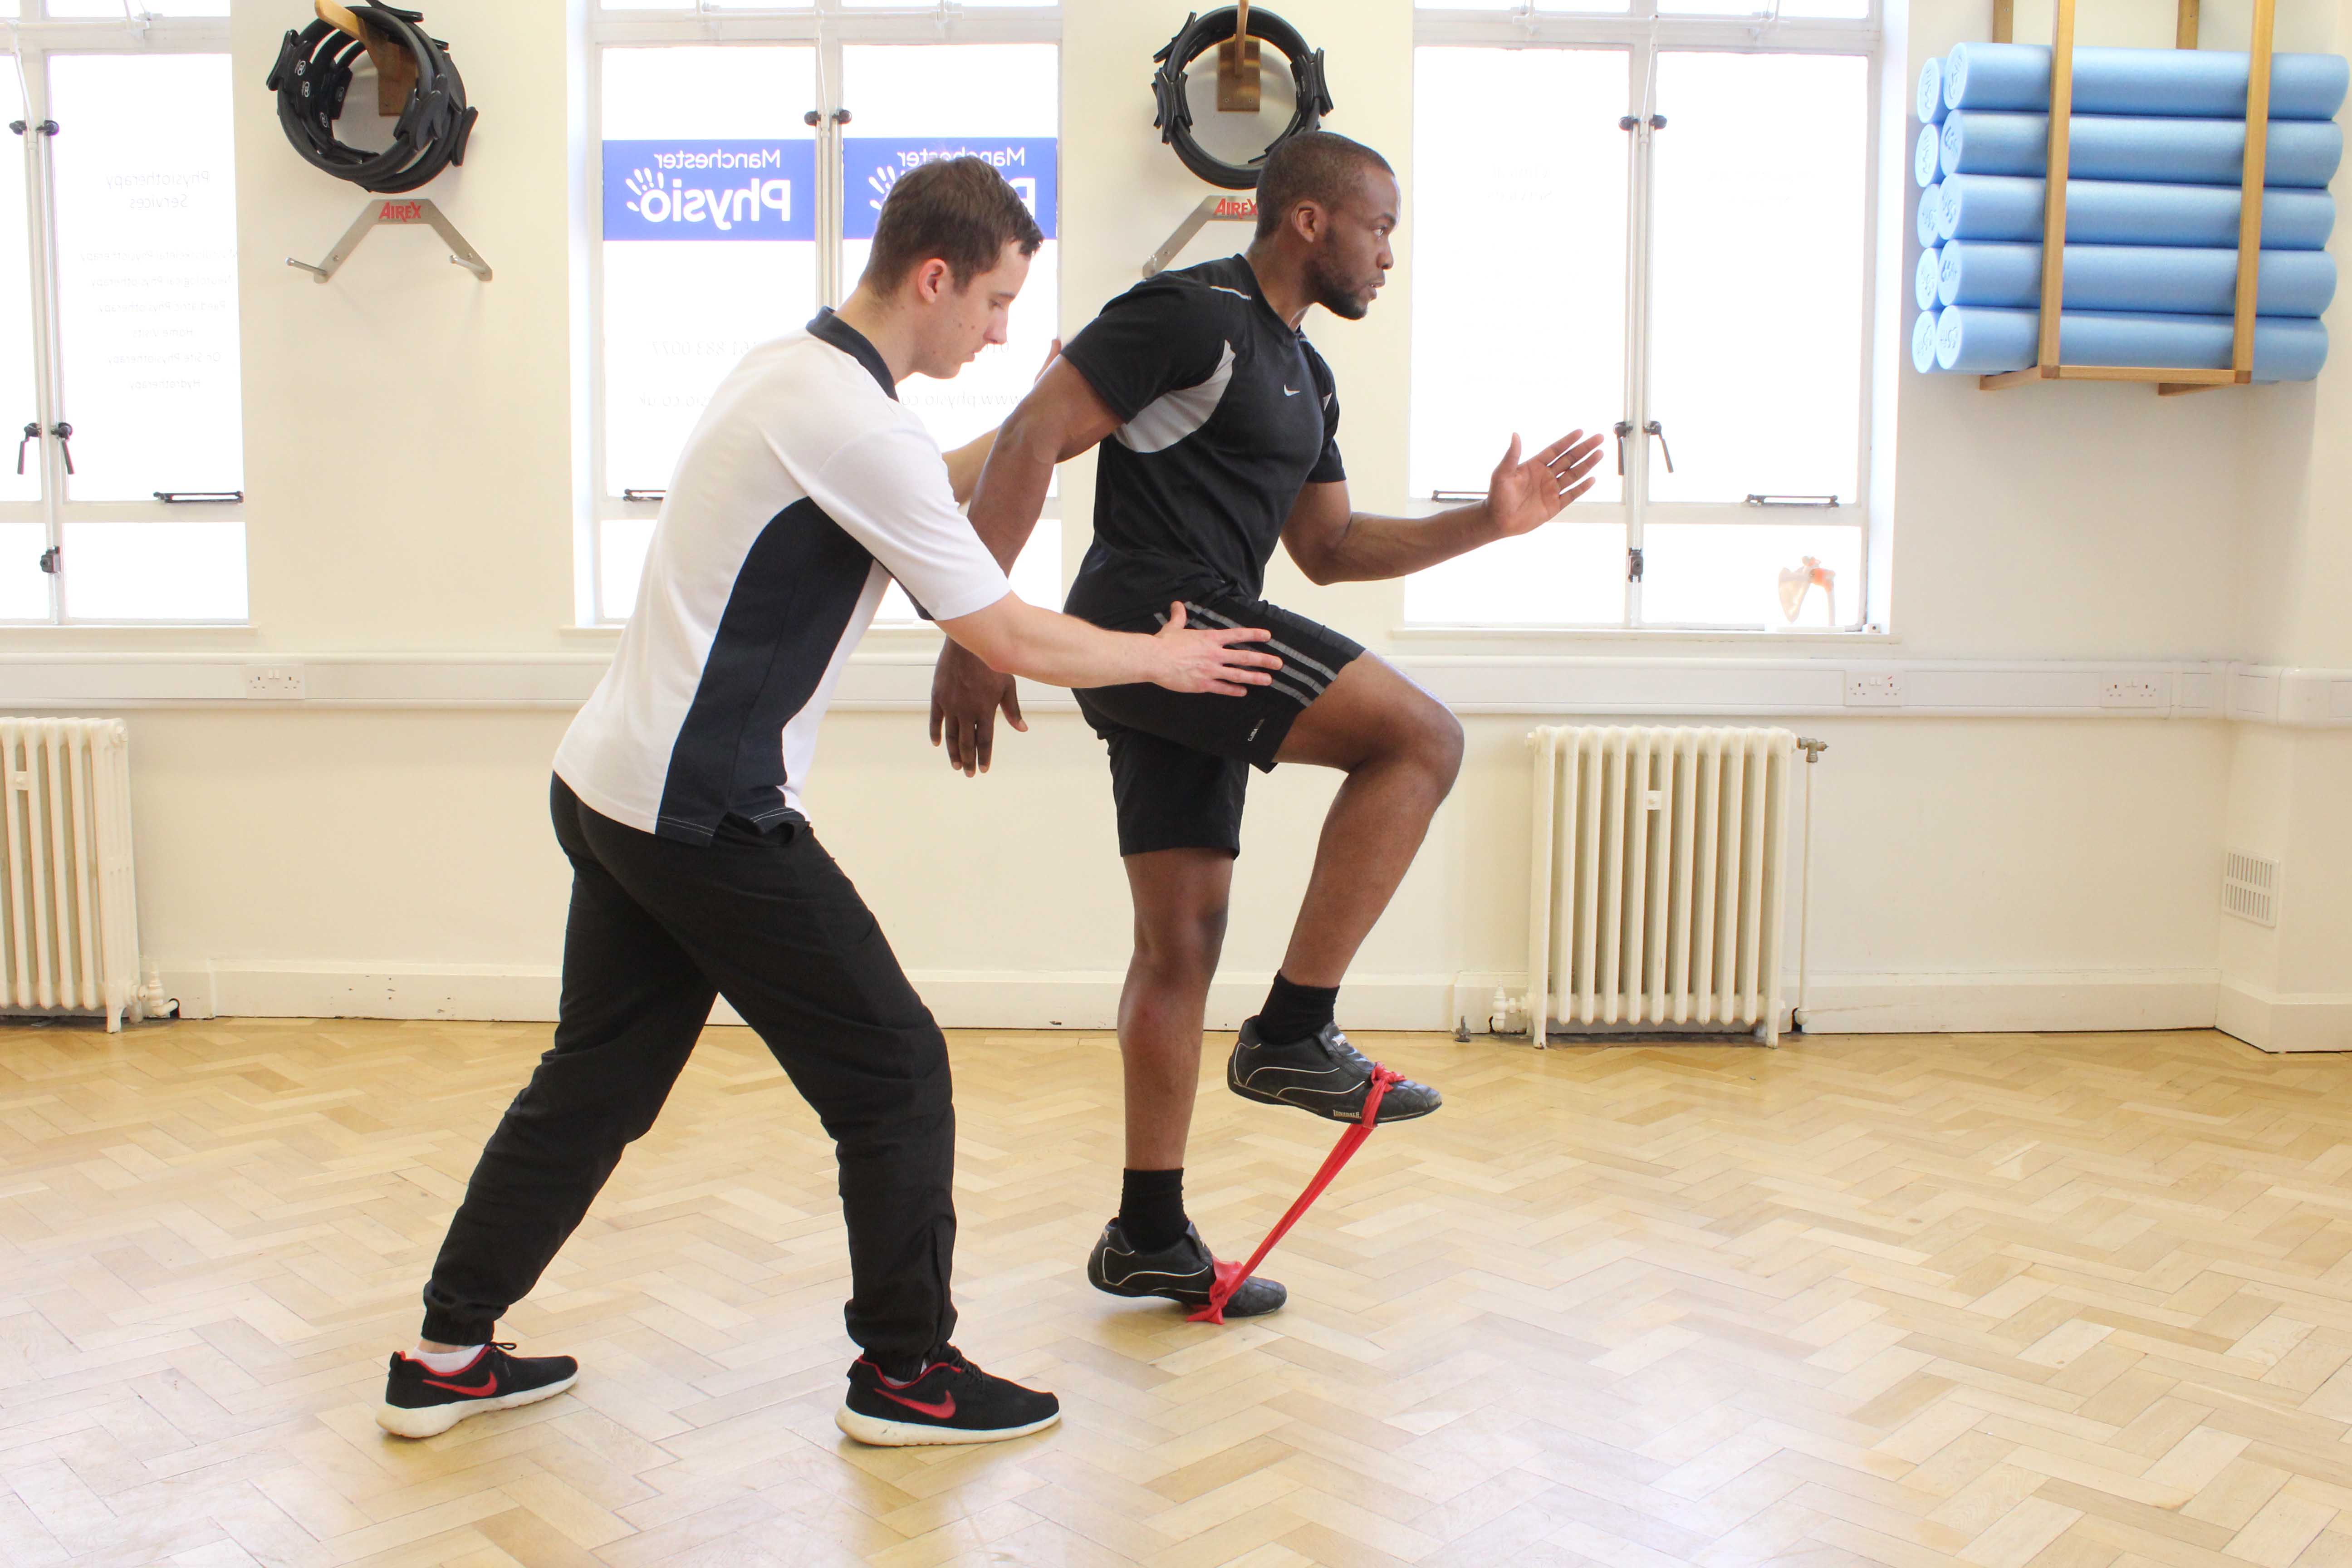 Physiotherapist supervising lower limb exercises using a resistance band.